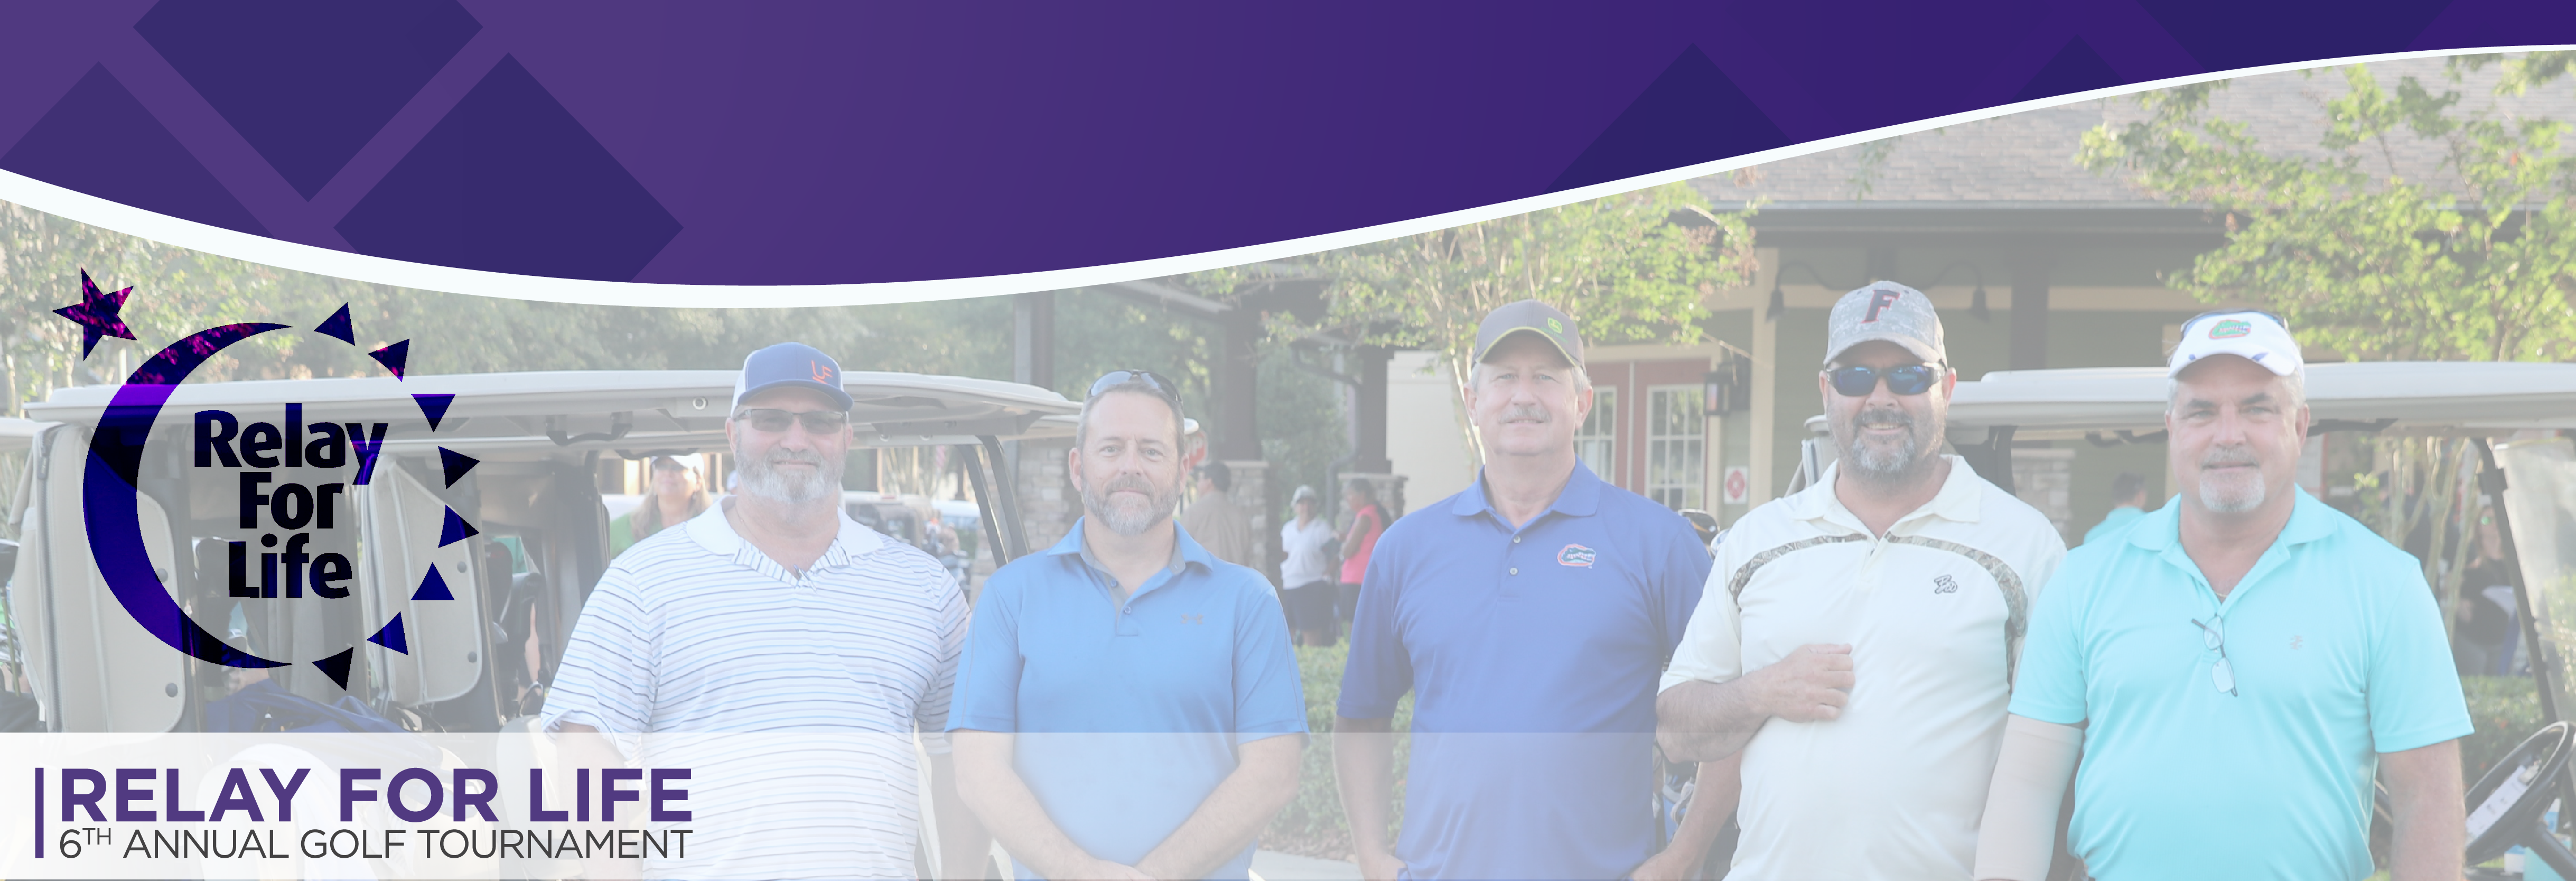 SECO News June 2019 Relay For Life 6th Annual Golf Tournament